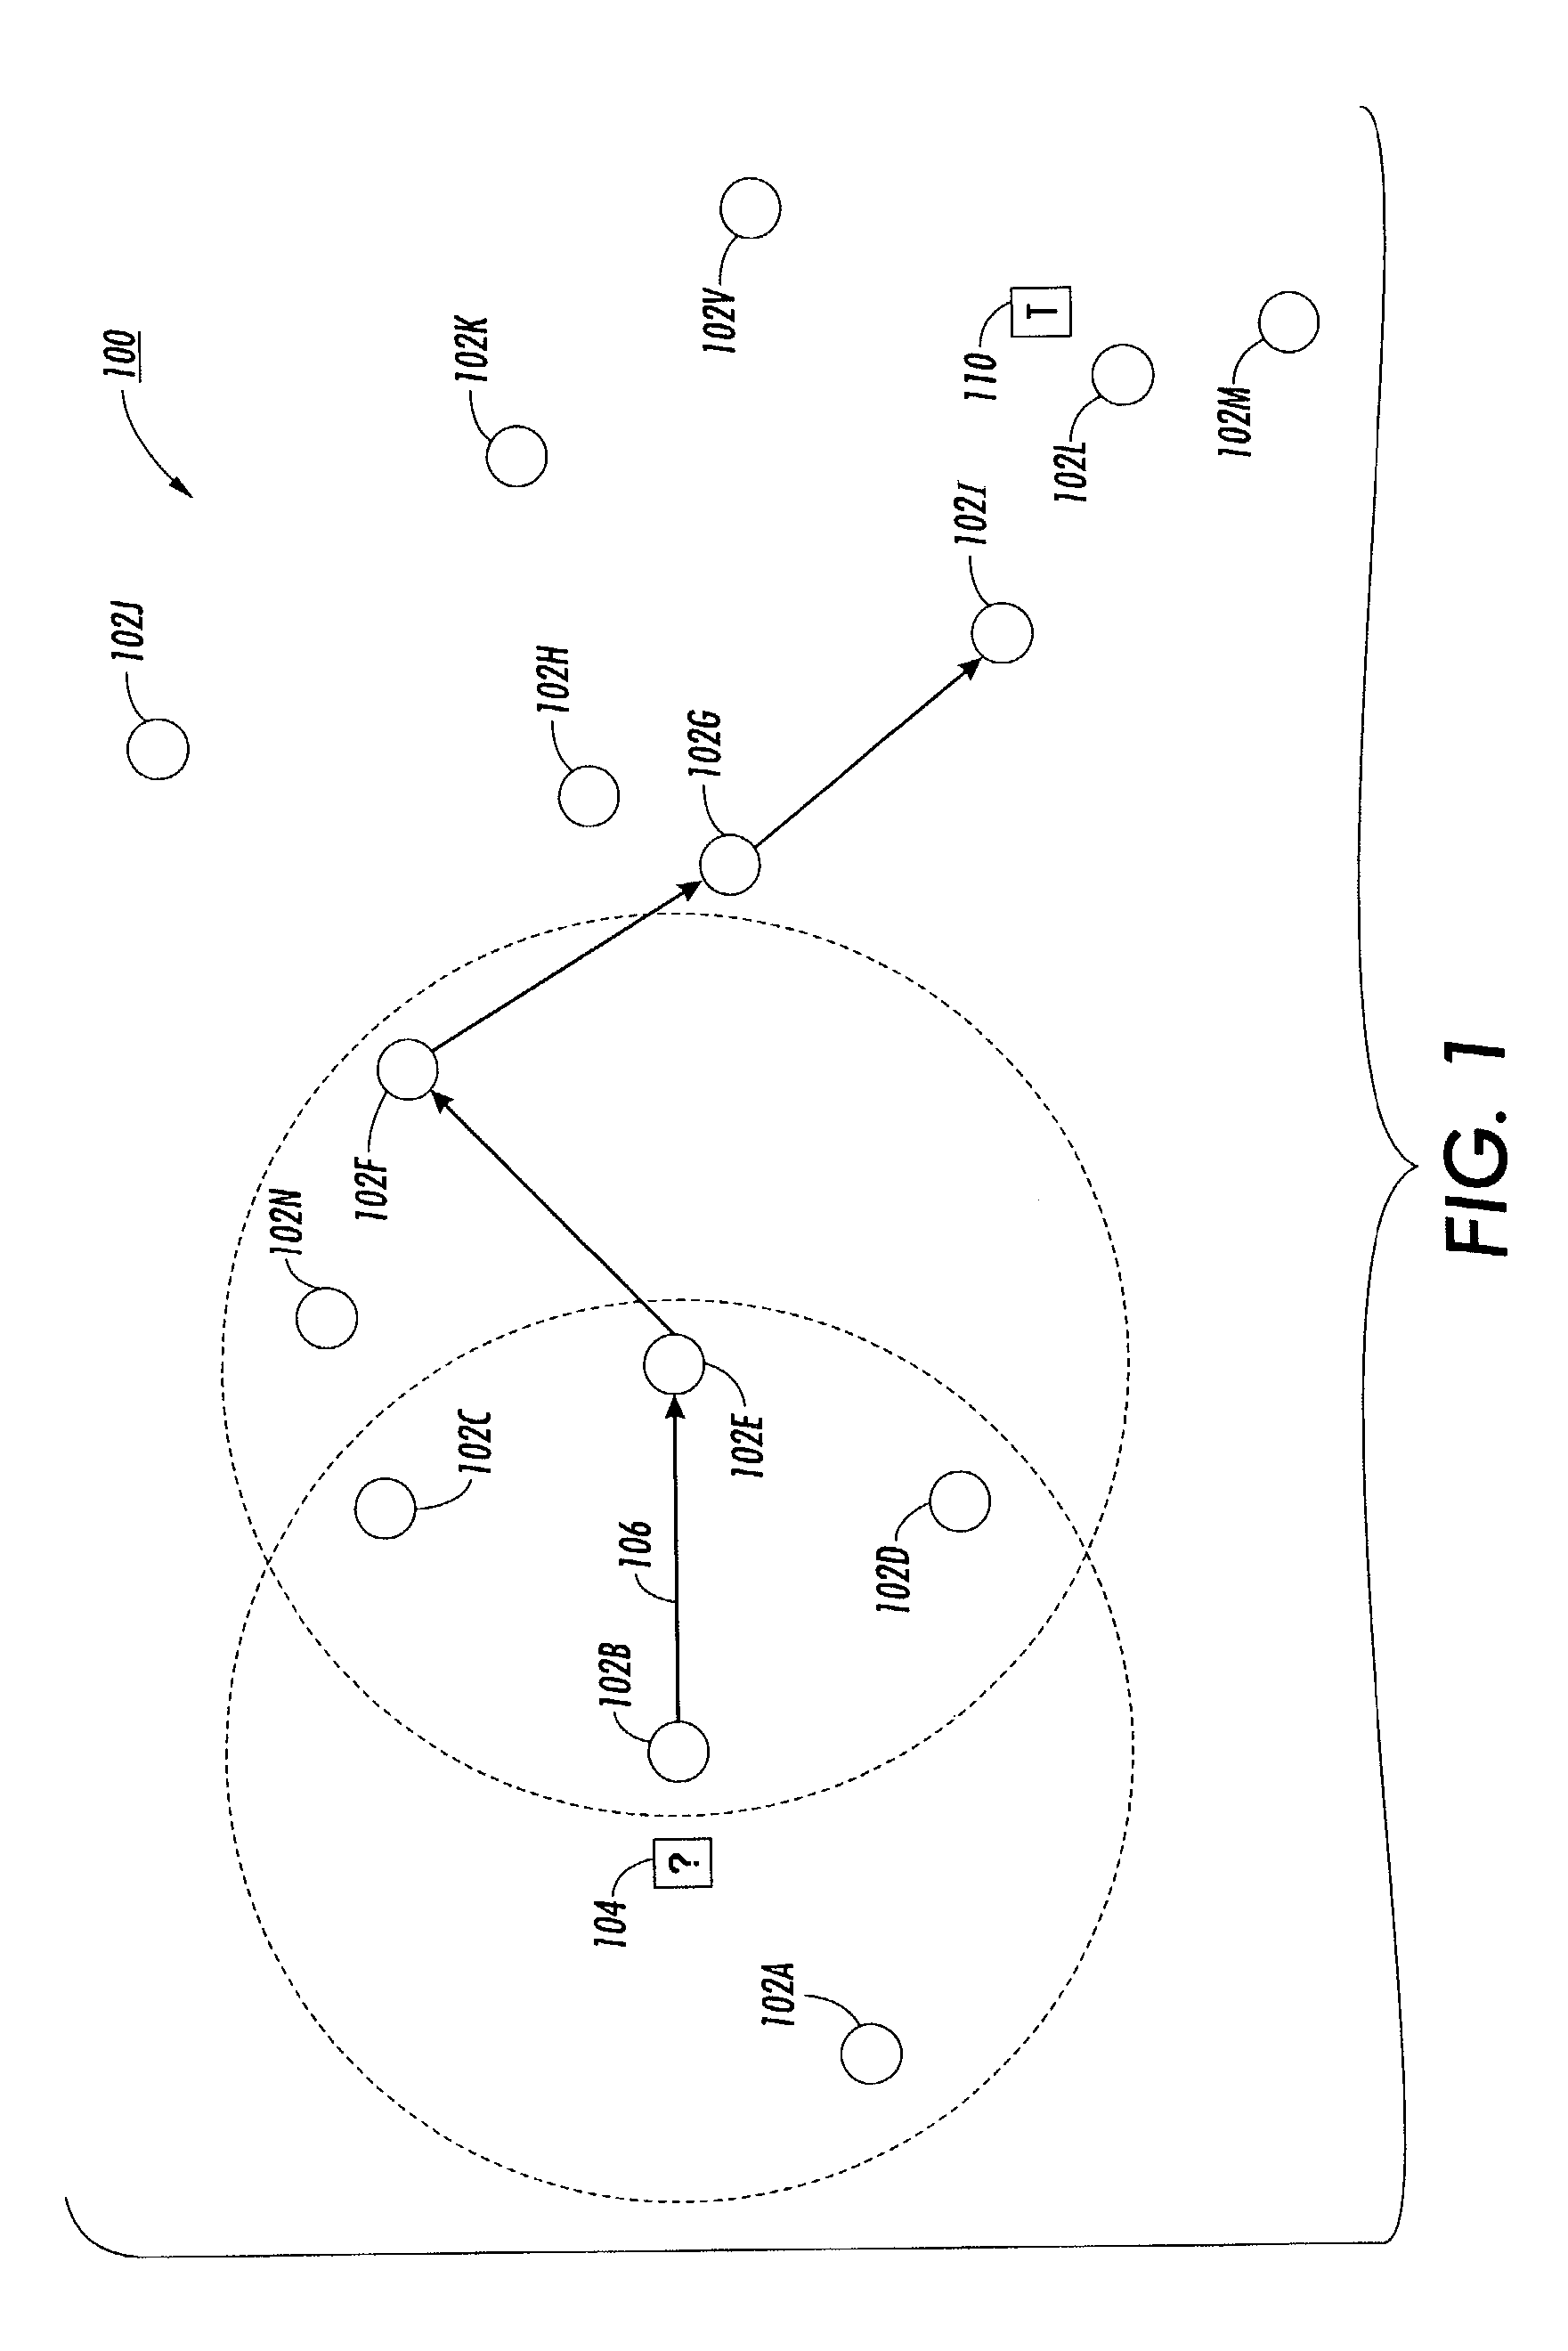 Systems and methods for constrained anisotropic diffusion routing within an ad hoc network